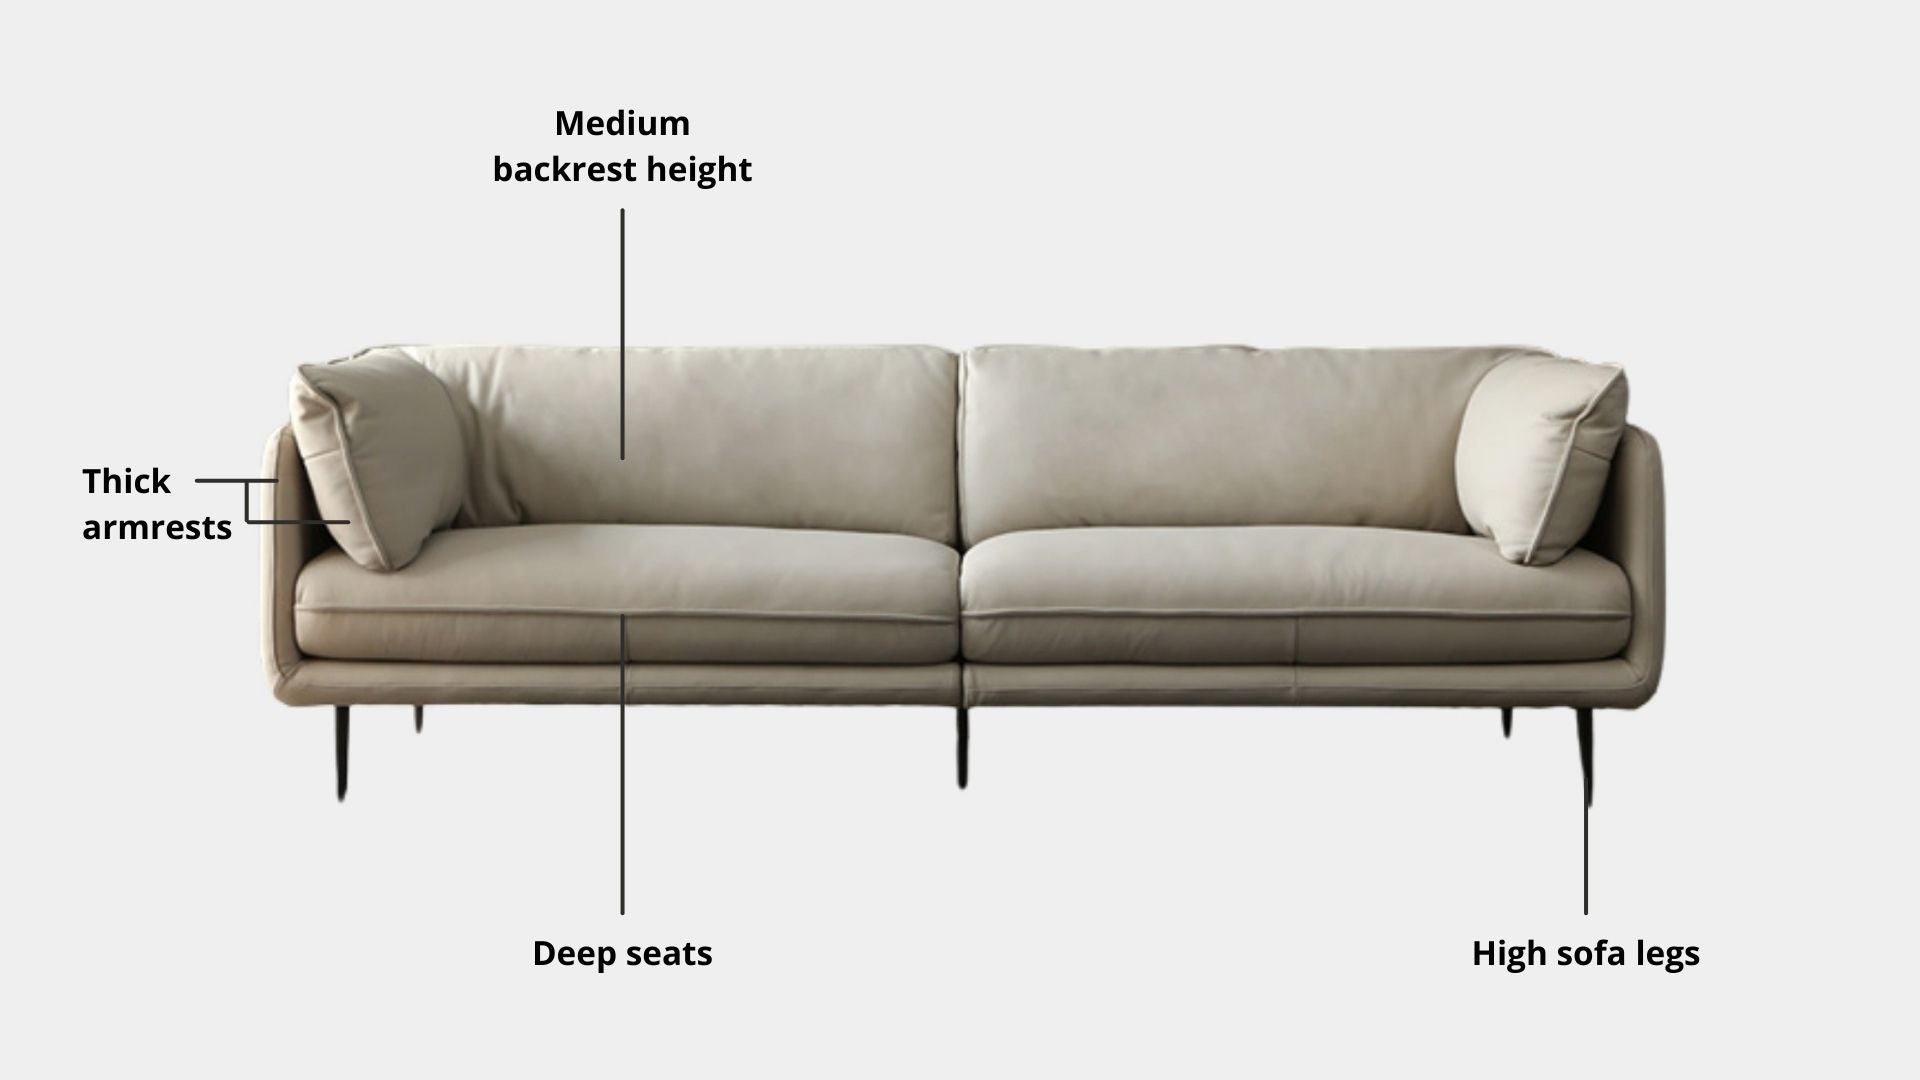 Key features such as armrest thickness, cushion height, seat depth and sofa leg height for Cuddle Half Leather Sofa